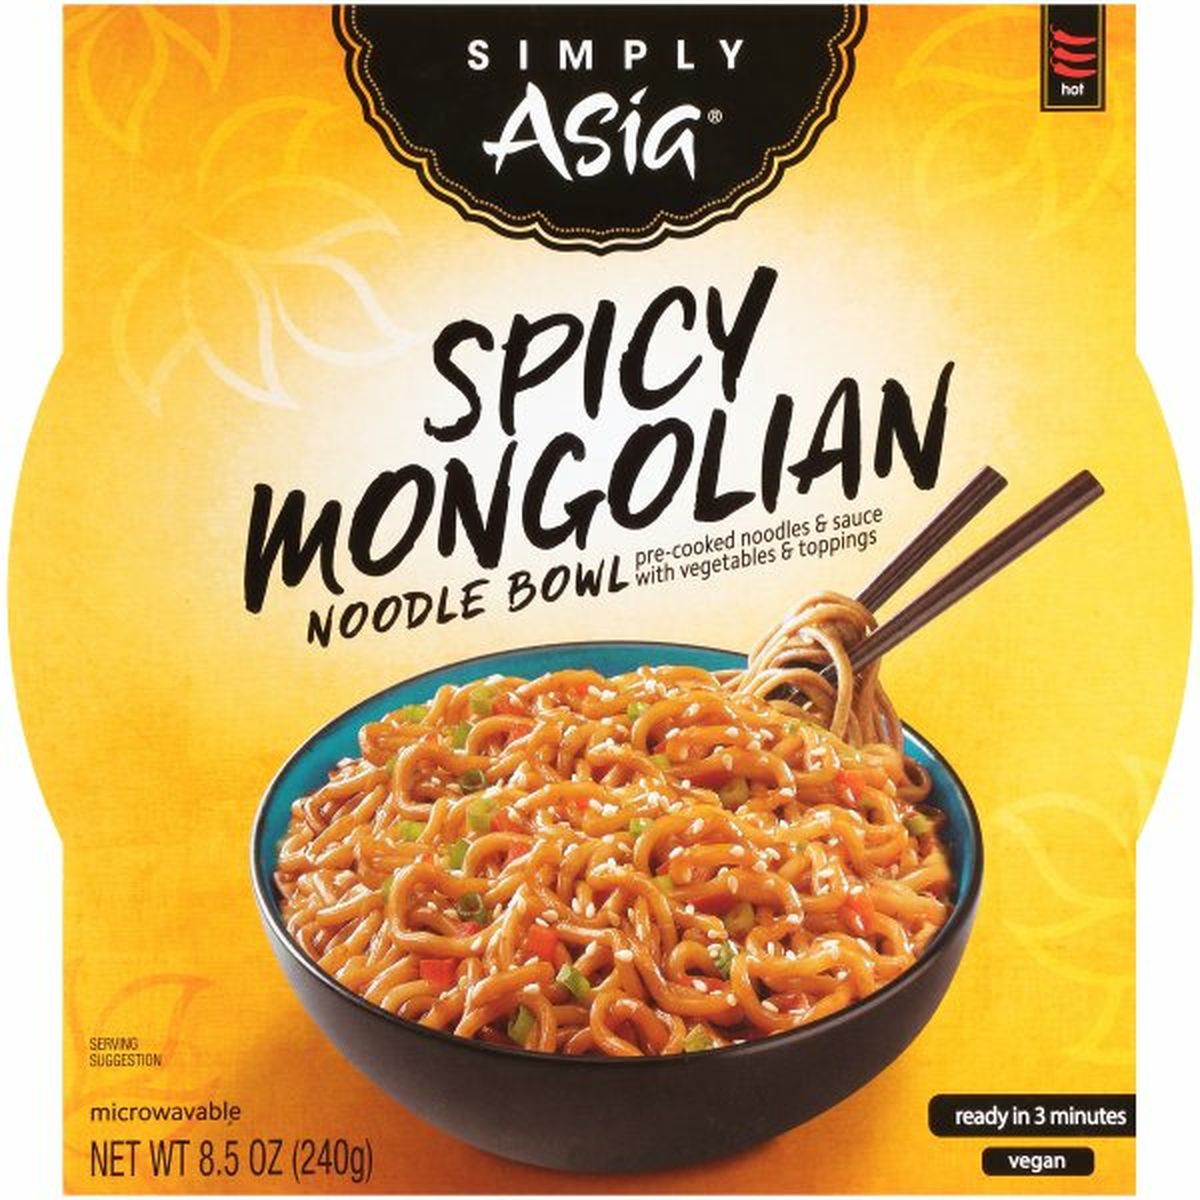 Calories in Simply Asias  Spicy Mongolian Noodle Bowl